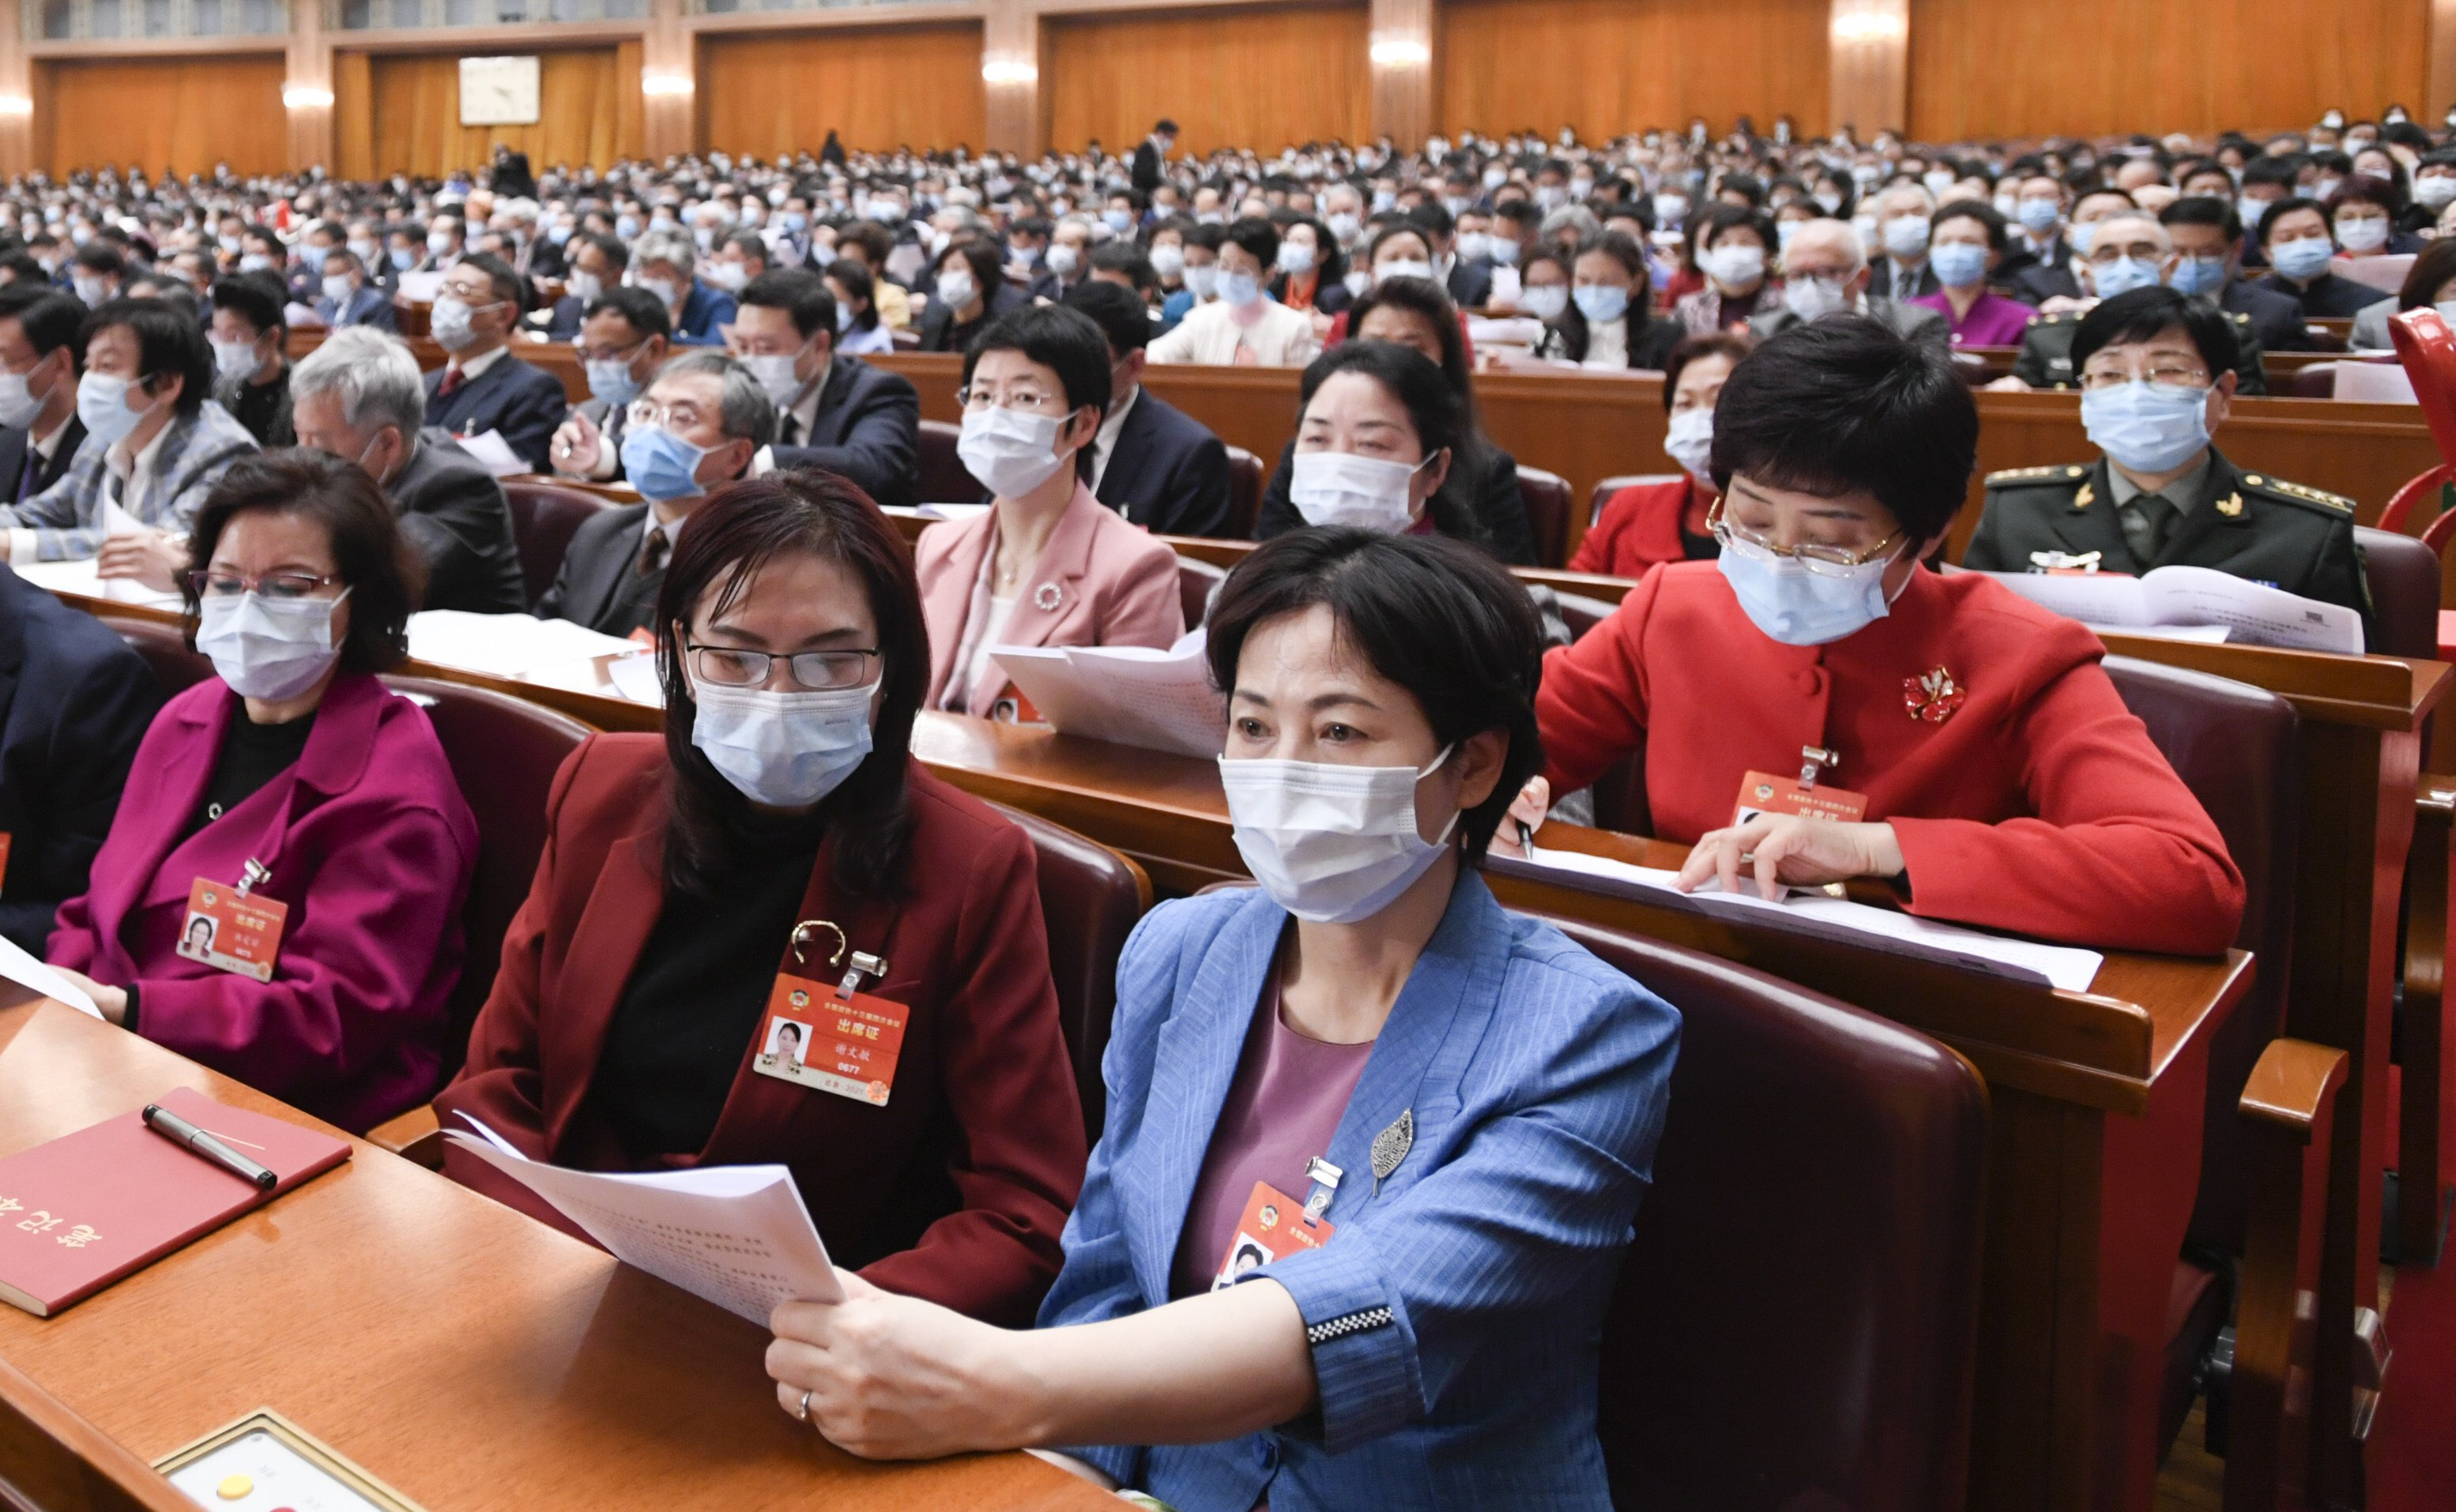 Women attend a meeting of the 13th CPPCC National Committee at the Great Hall of the People in Beijing on March 4. Photo: Xinhua